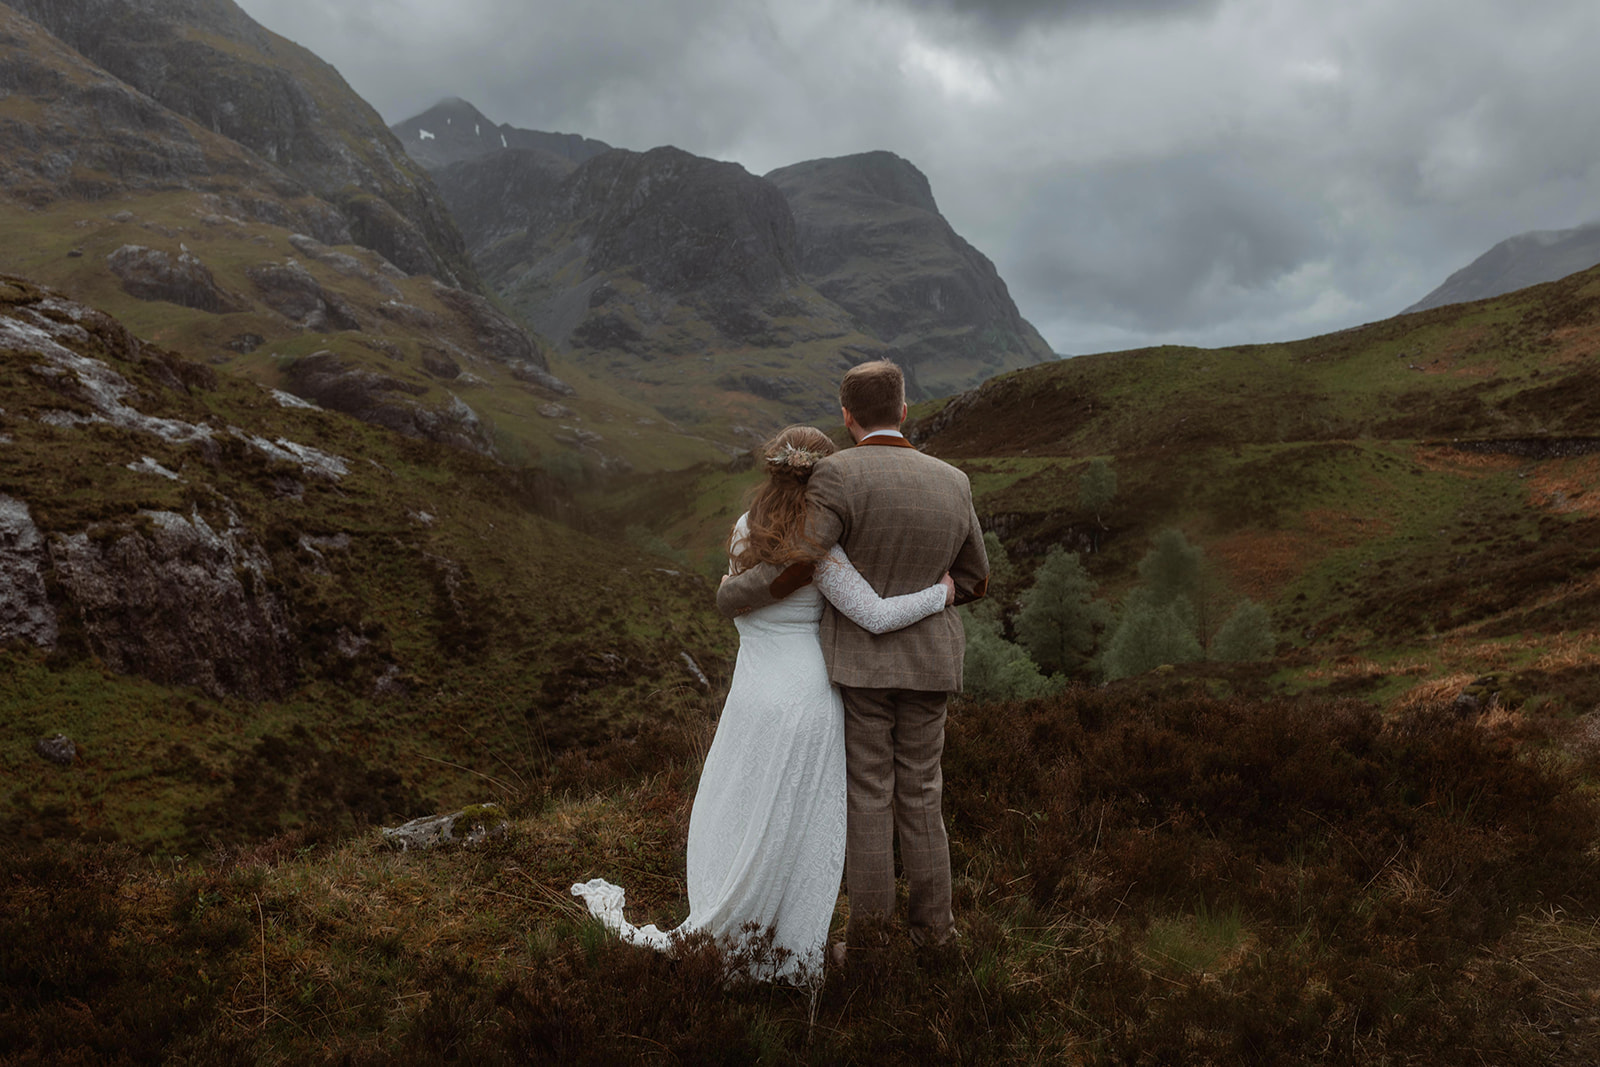 Holly and James walk hand in hand after their elopement ceremony in the majestic Glencoe on the Isle of Skye